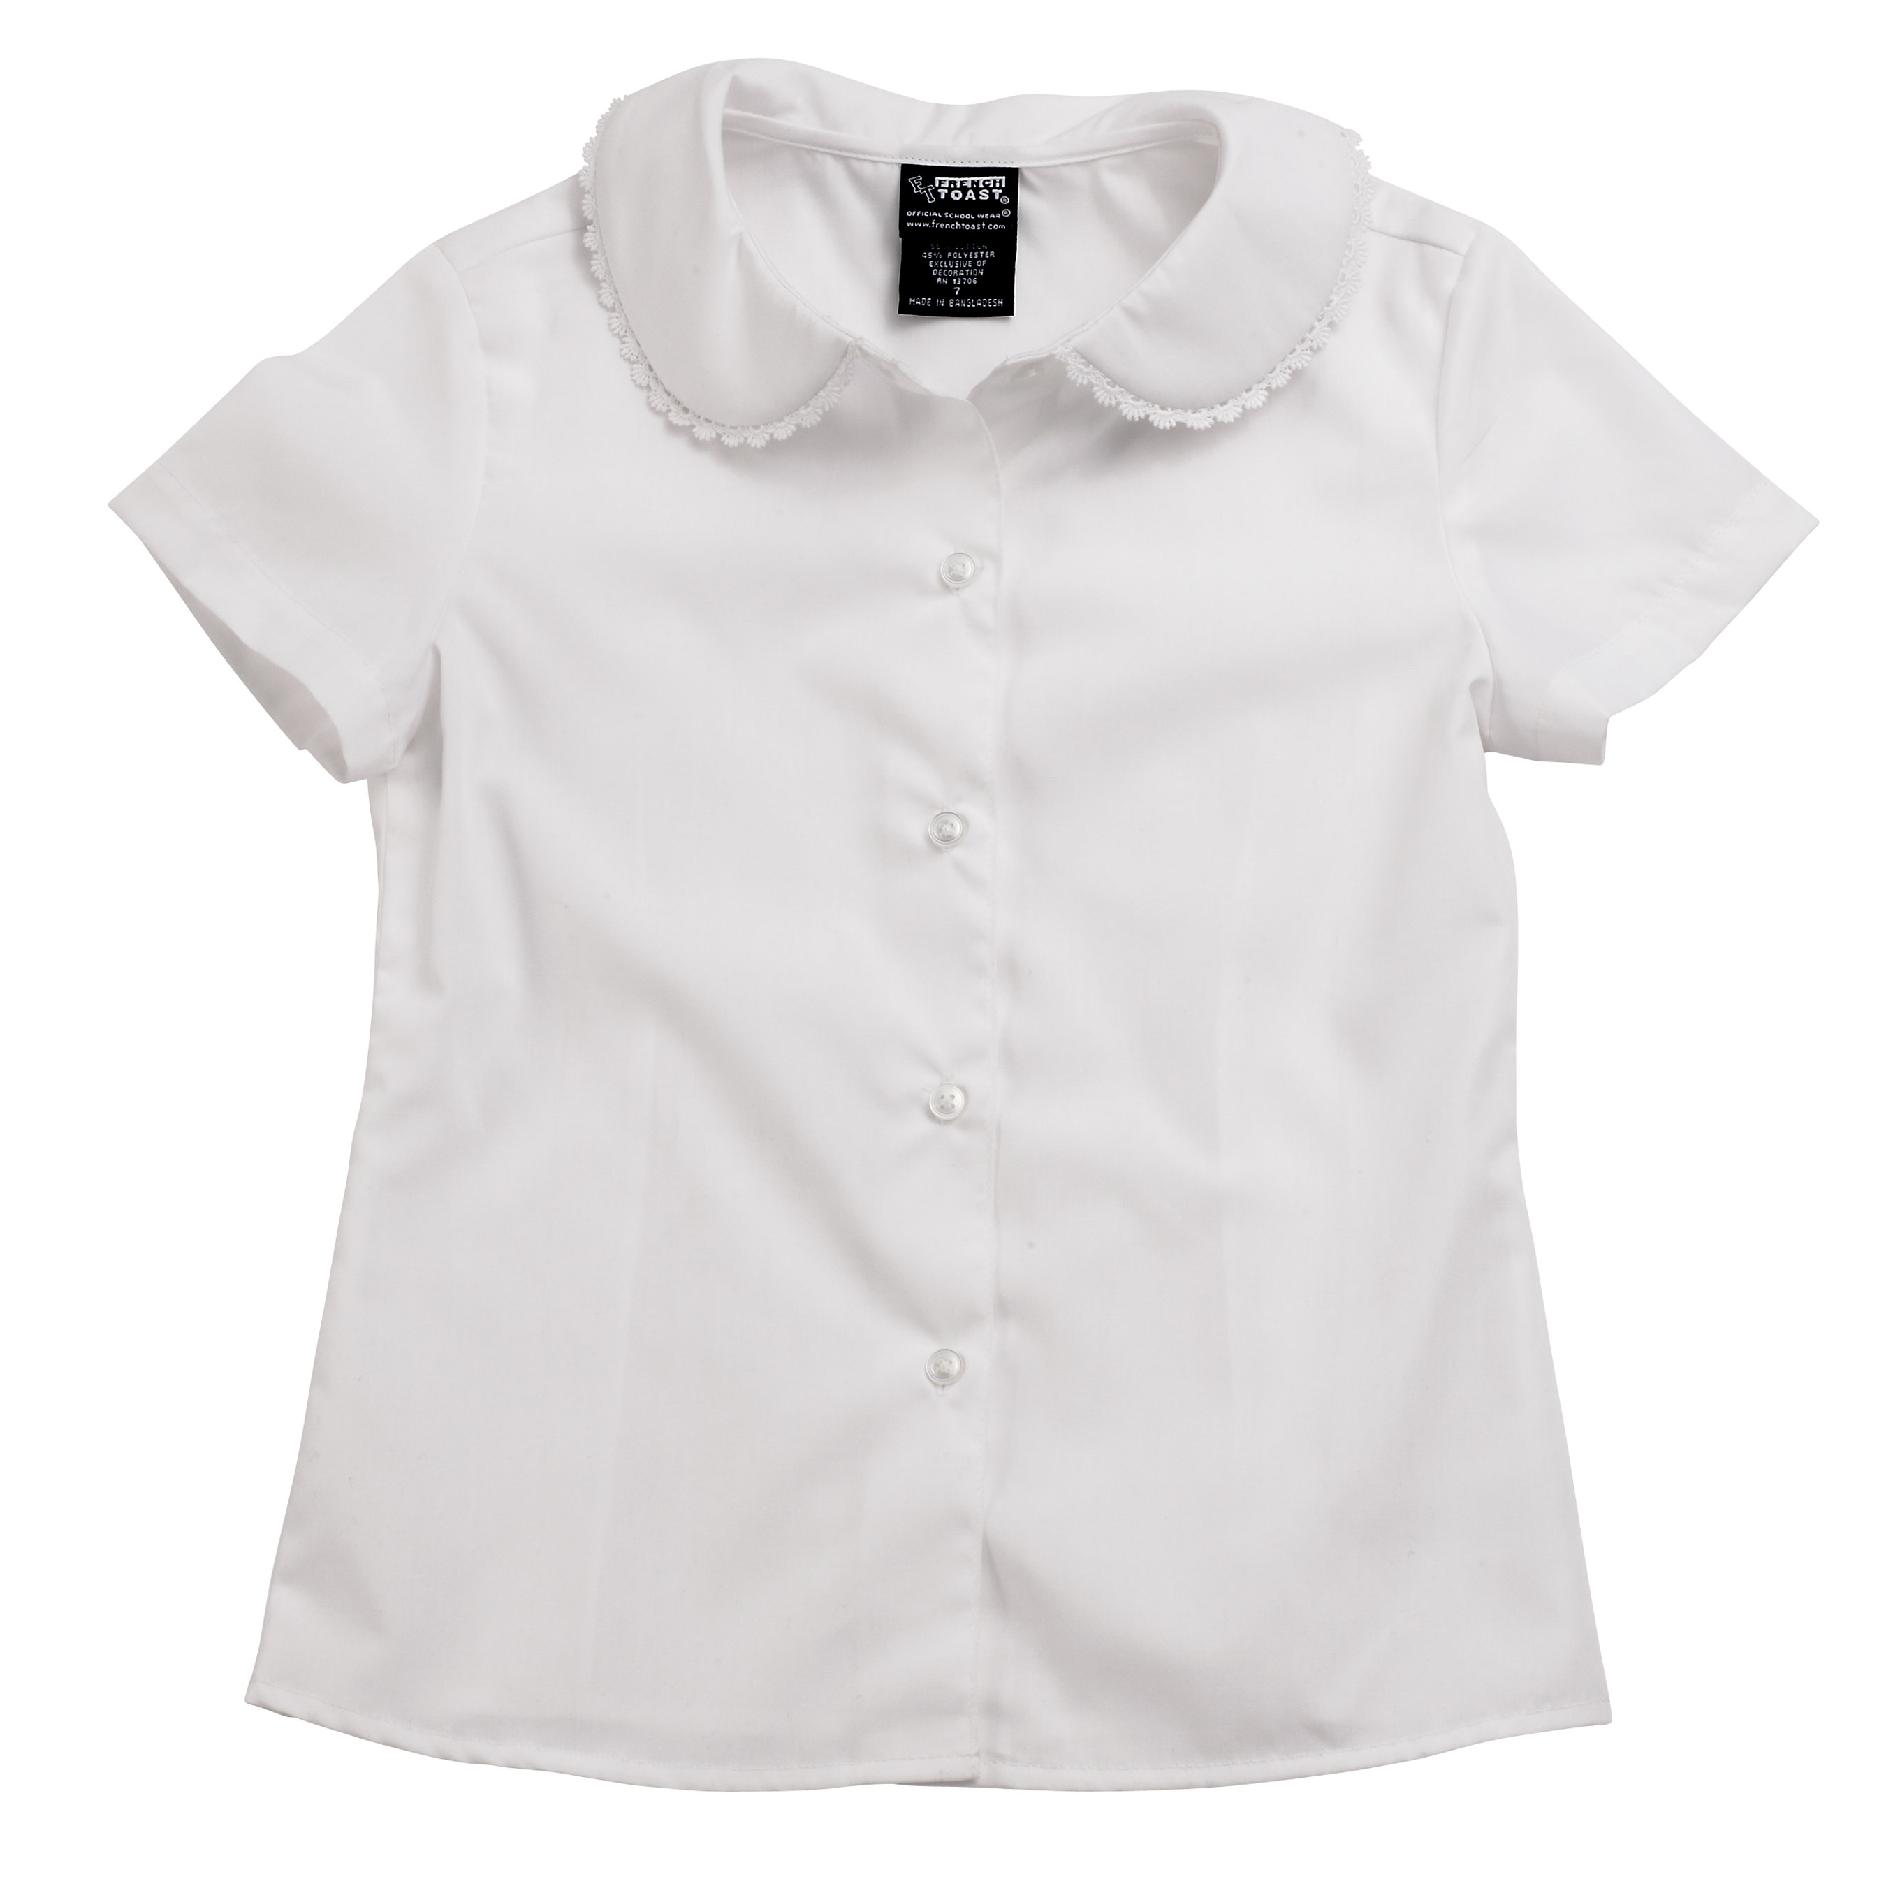 Short Sleeve Peter Pan Blouse with Lace Trim Collar (Feminine Fit)